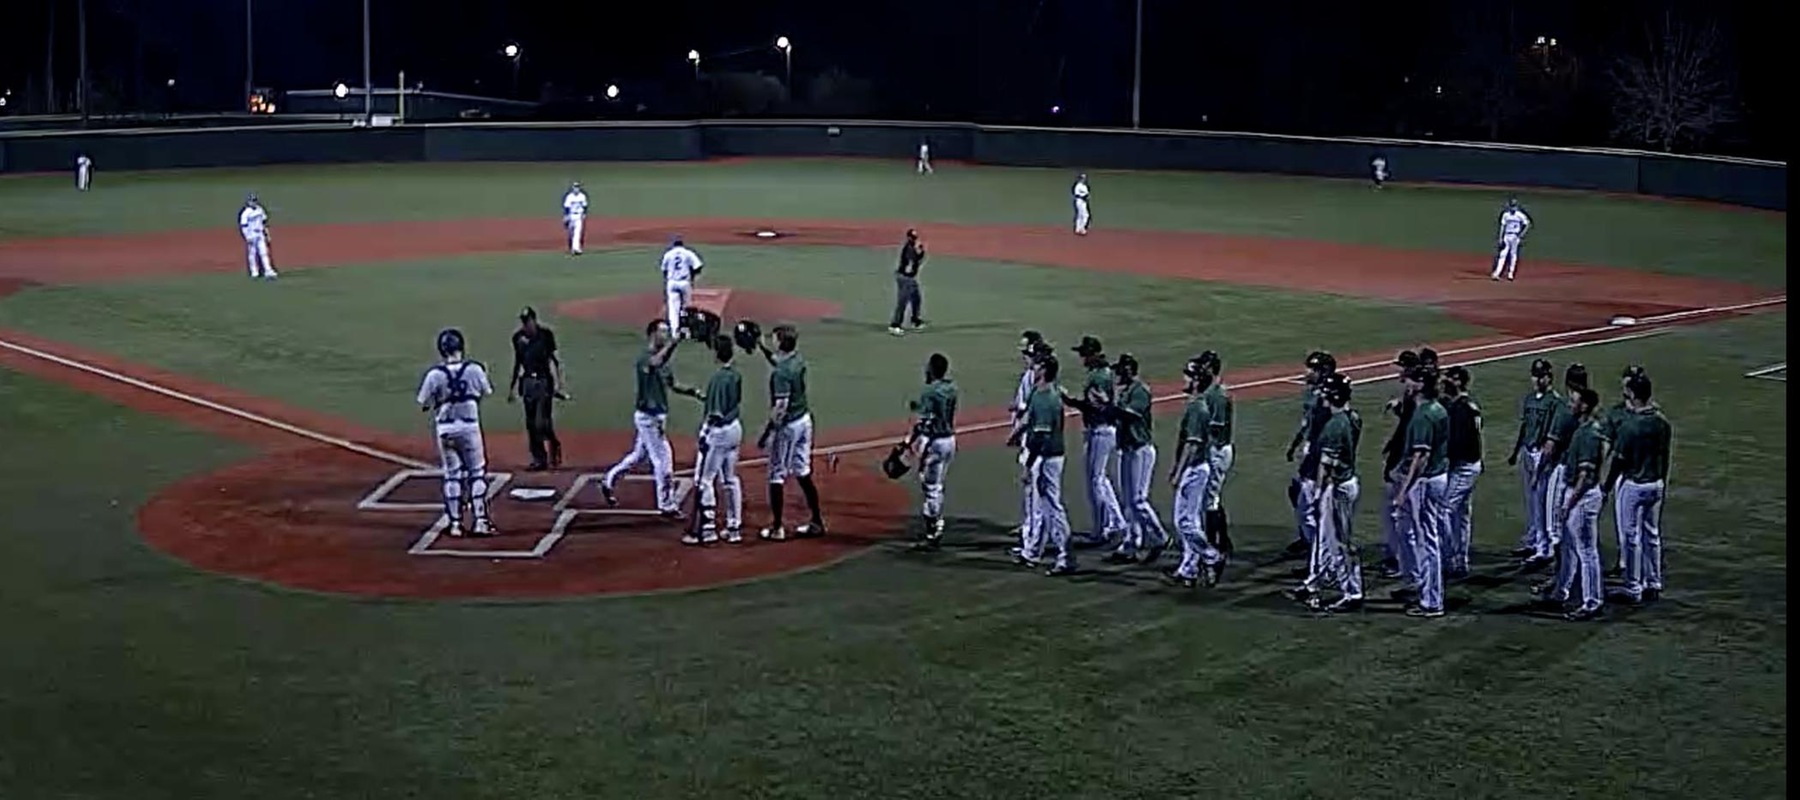 Screenshot of Shawn Edevane touching home plate after his homer in the opener against New Haven in Myrtle Beach.